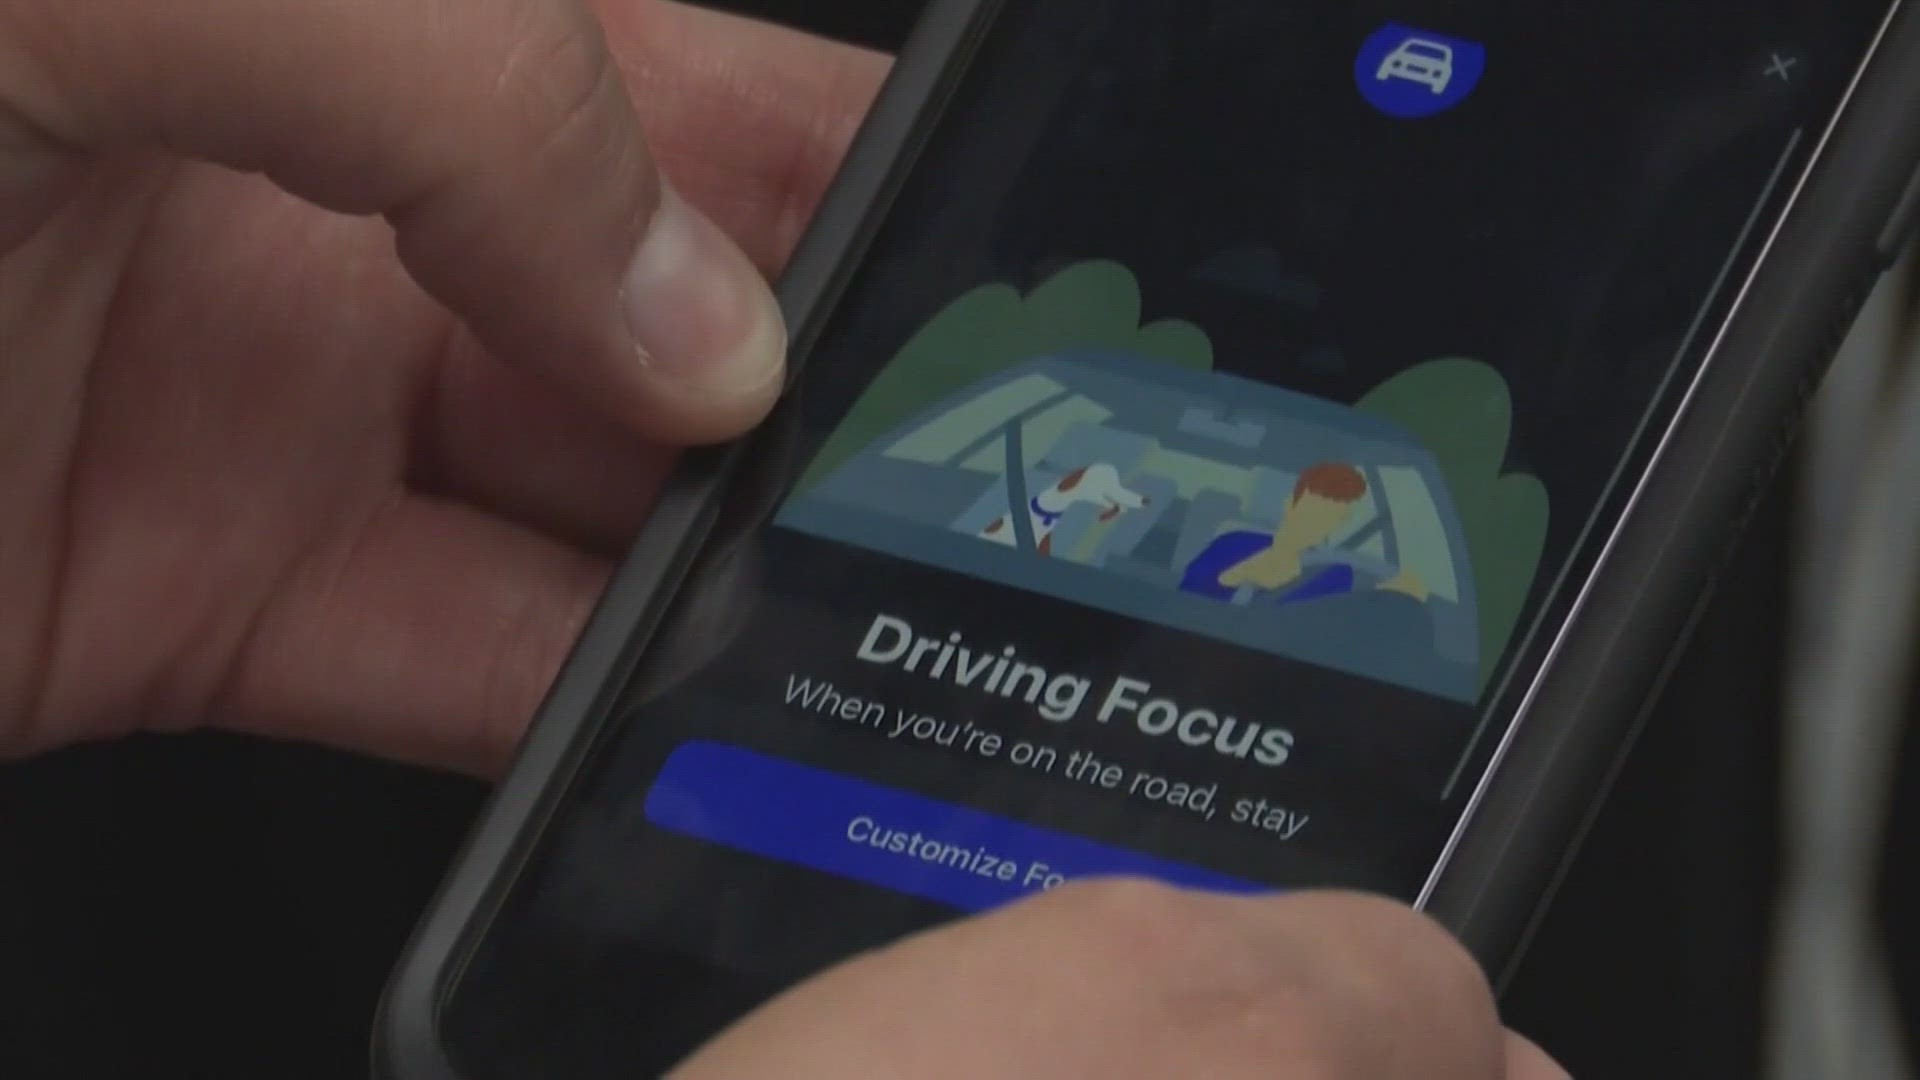 State leaders say distracted driving cases hit a six-year low last month thanks to Ohio's new distracted driving law.